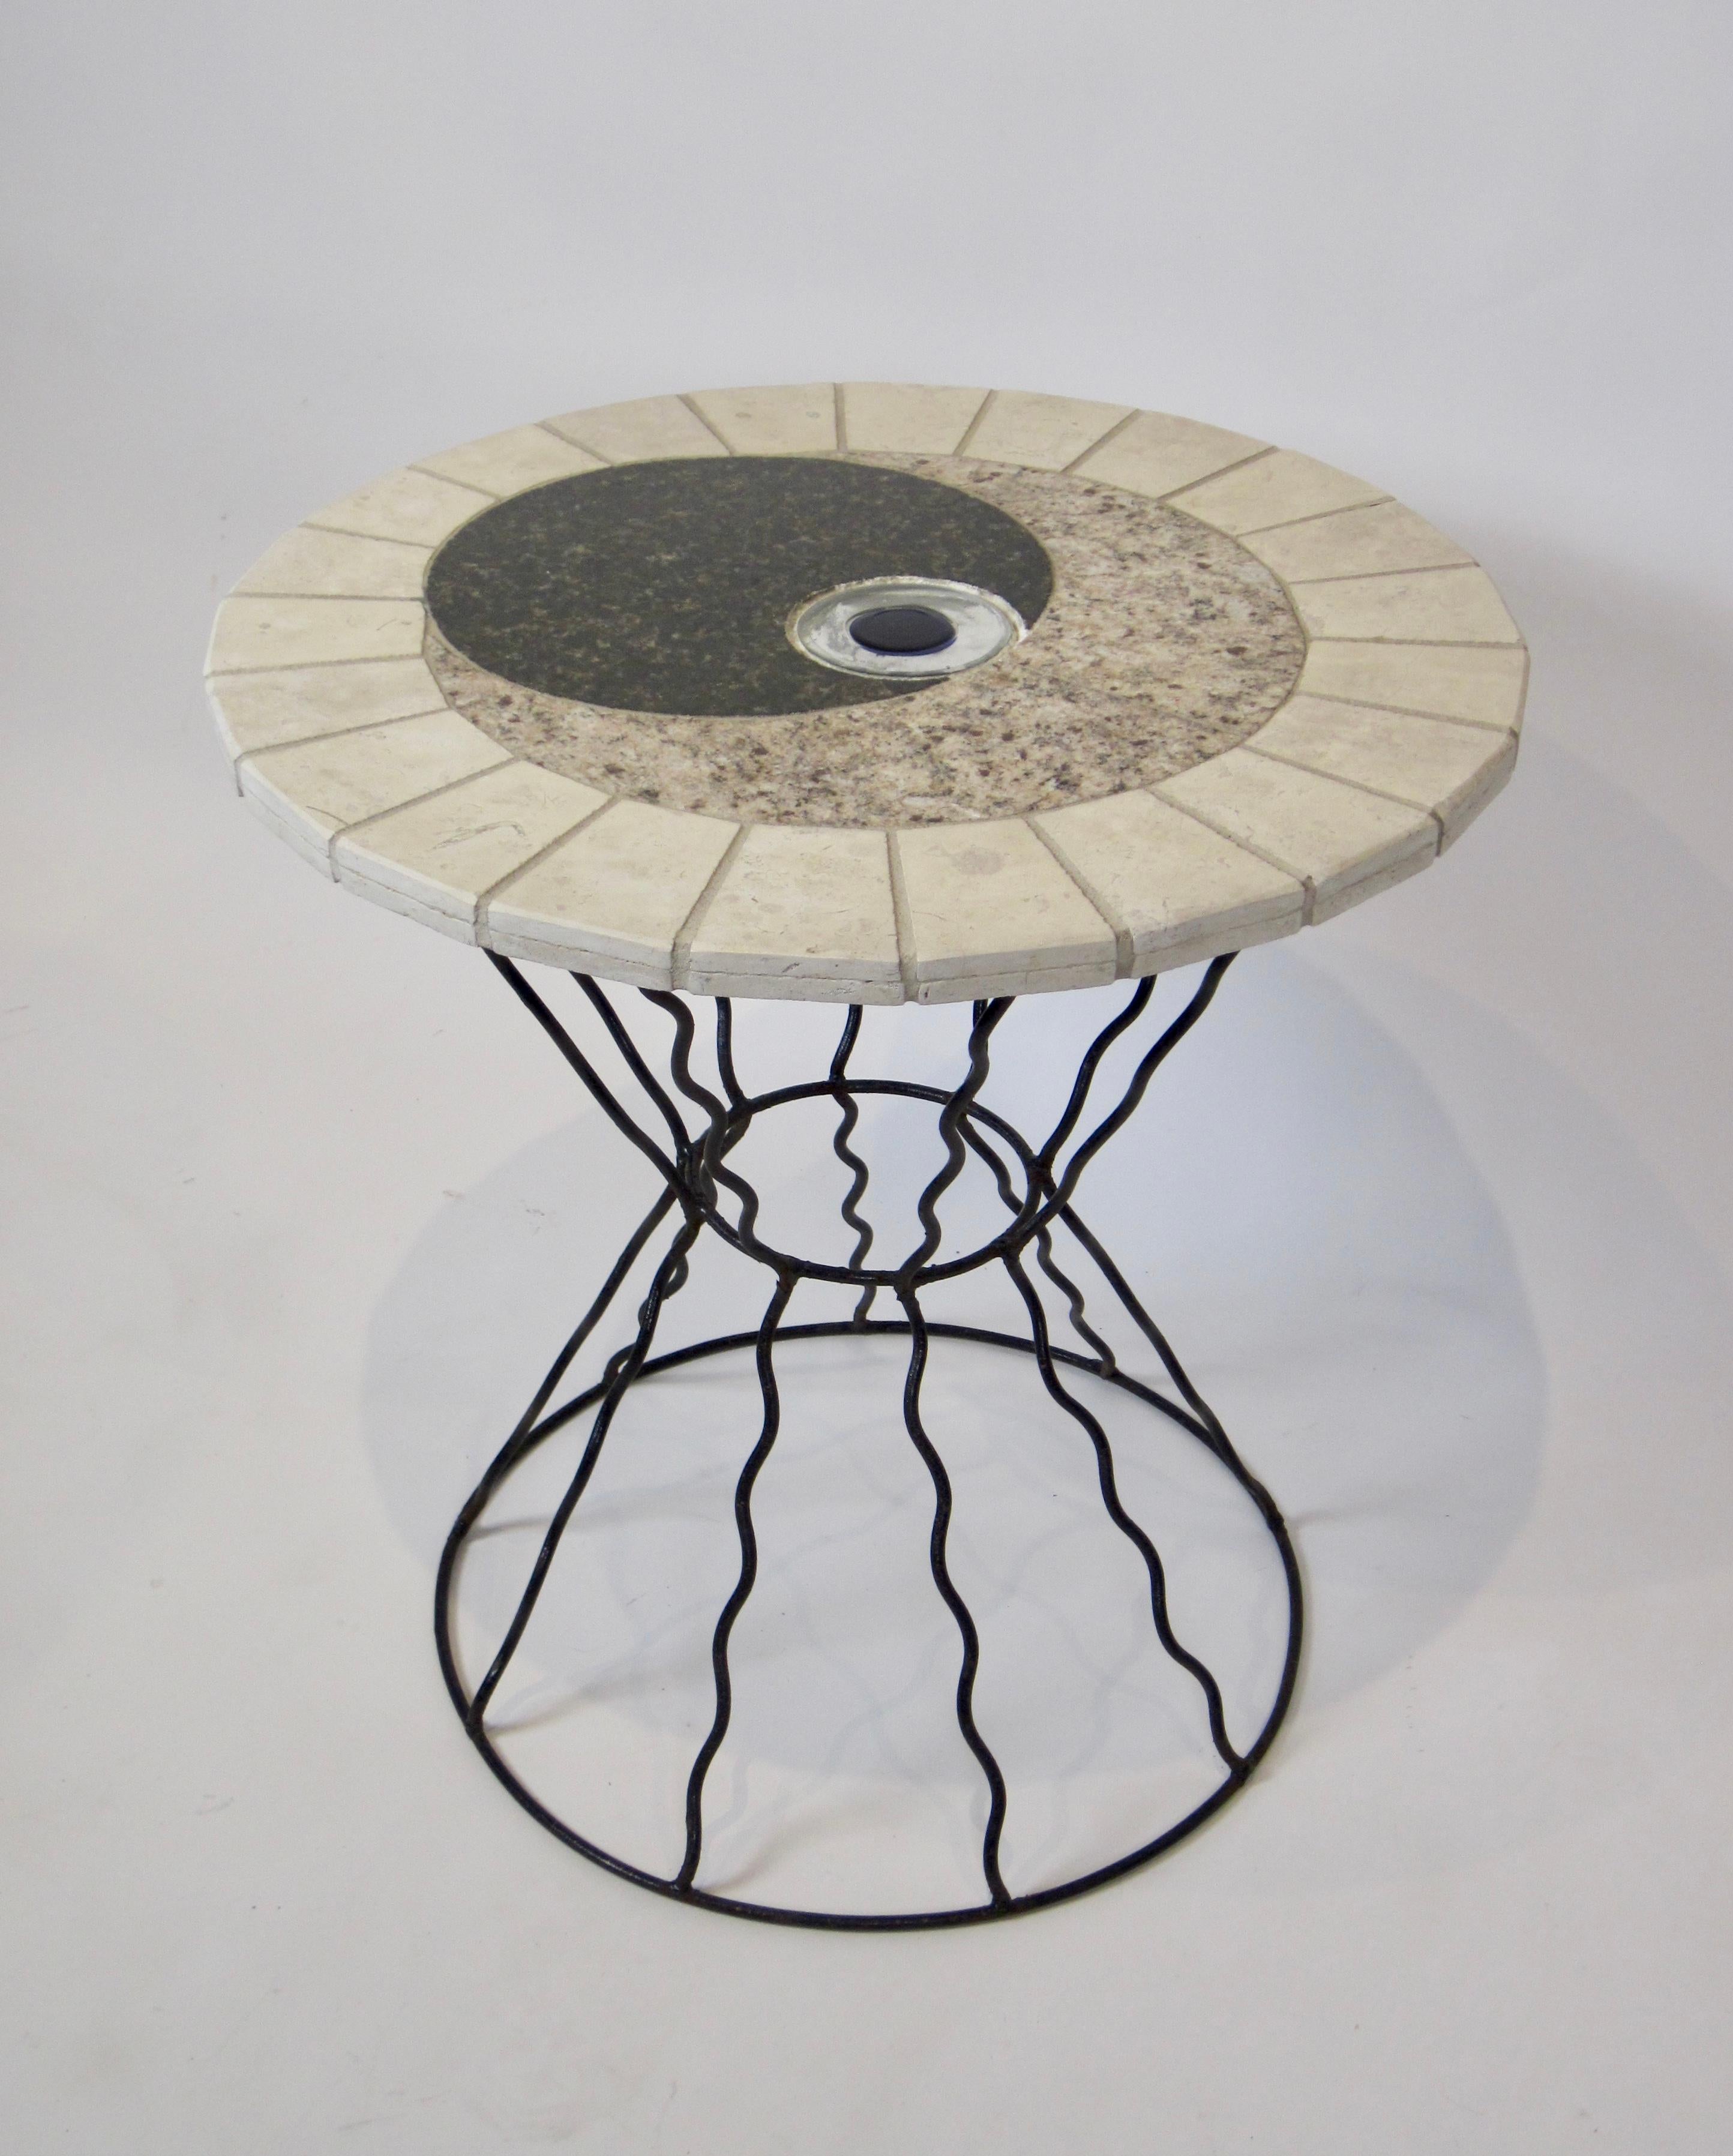 Post-Modern Memphis Era Stone & Glass Table on Wrought Iron Base with Third Eye Design For Sale